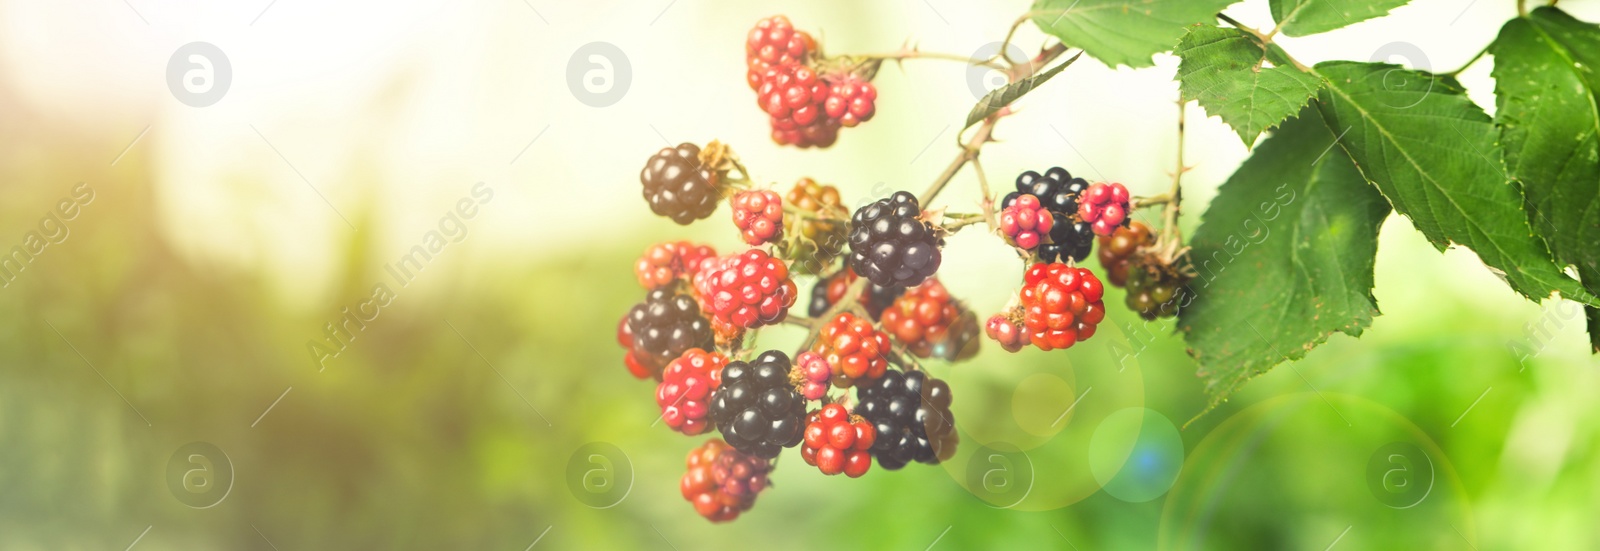 Image of Branch with ripening blackberries on blurred background, closeup. Banner design